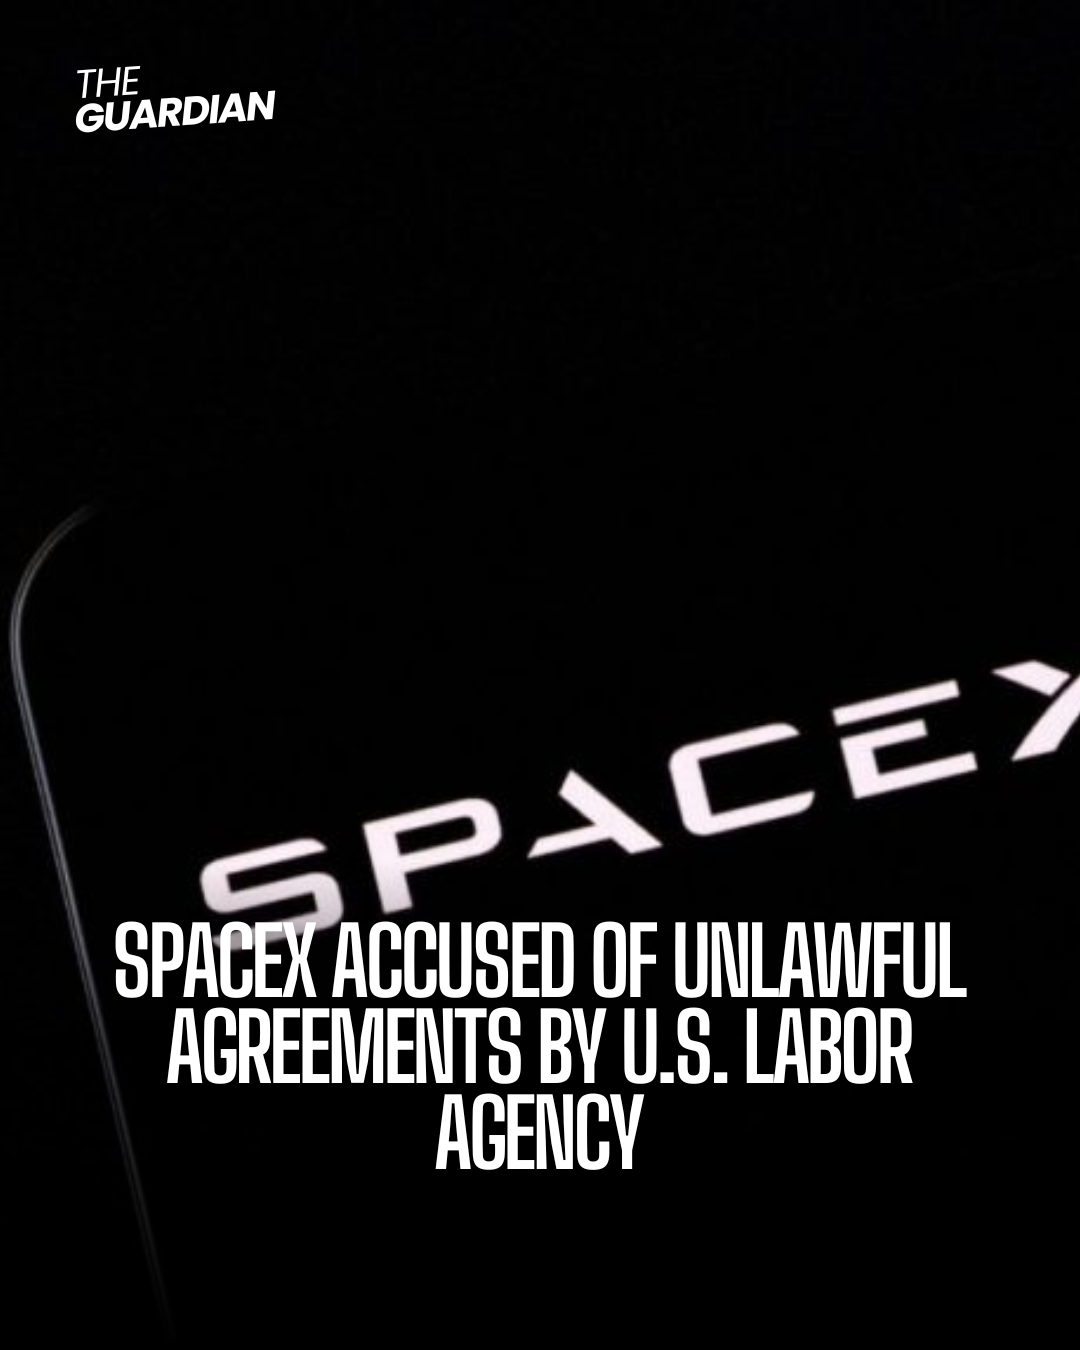 The National Labour Relations Board (NLRB) is accusing SpaceX of establishing improper agreements with separated personnel.